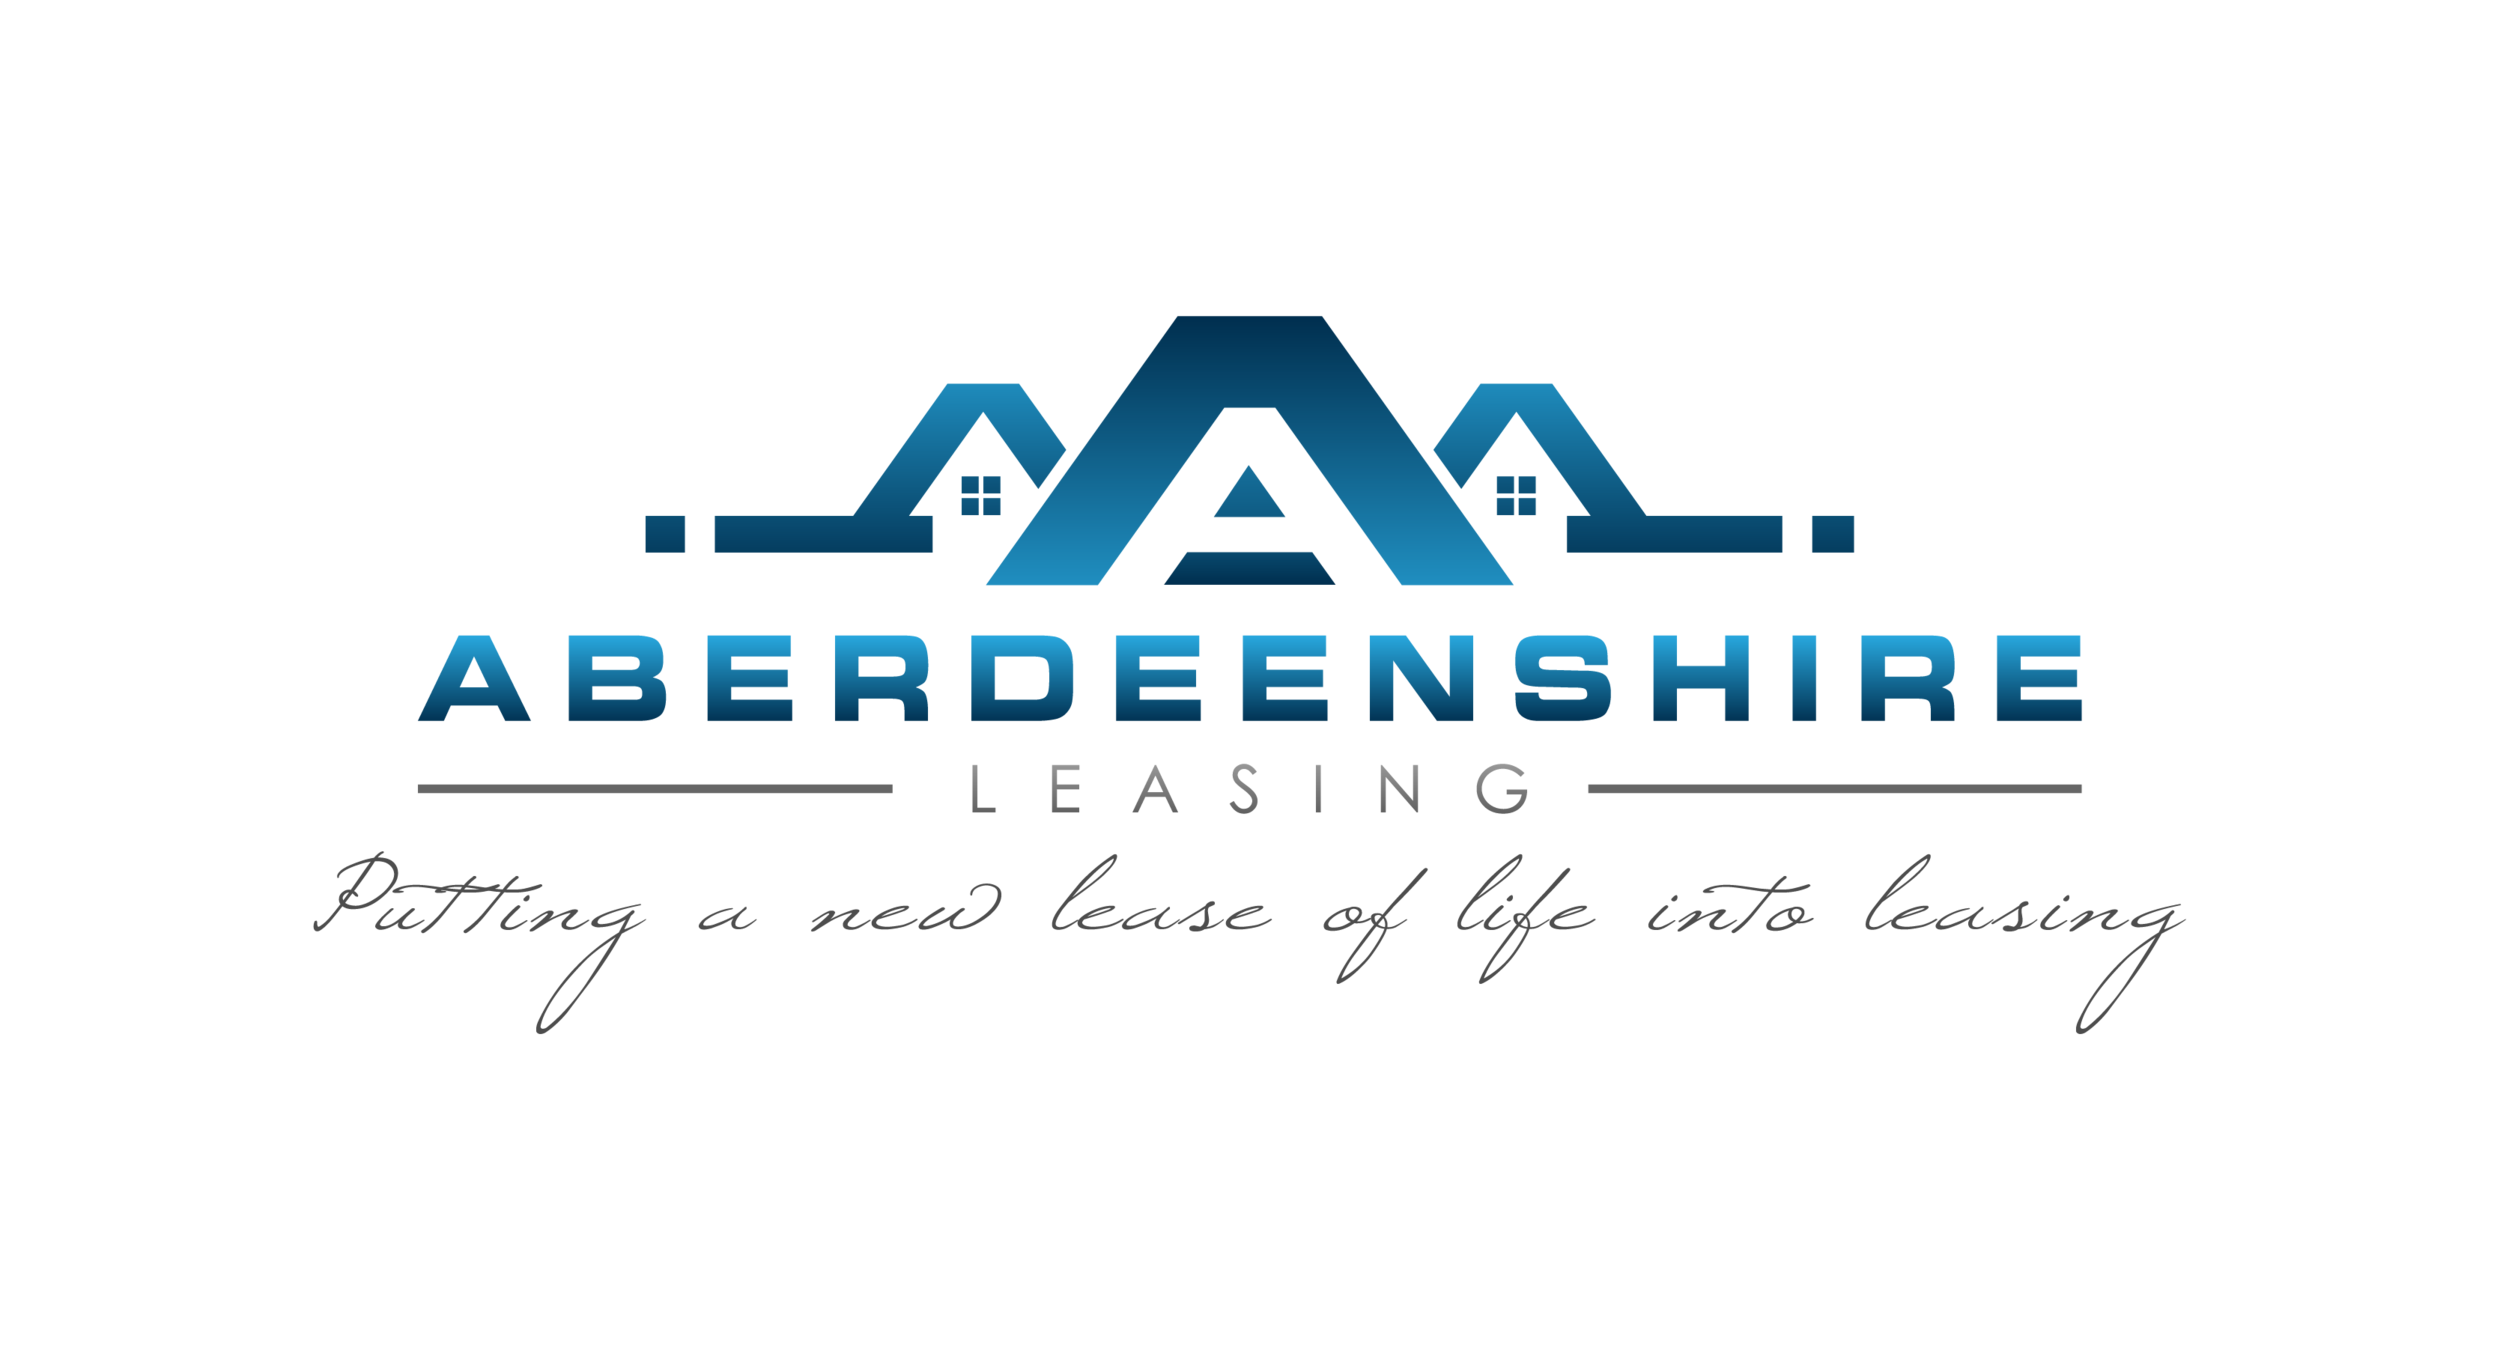 aberdeenshire leasing.png